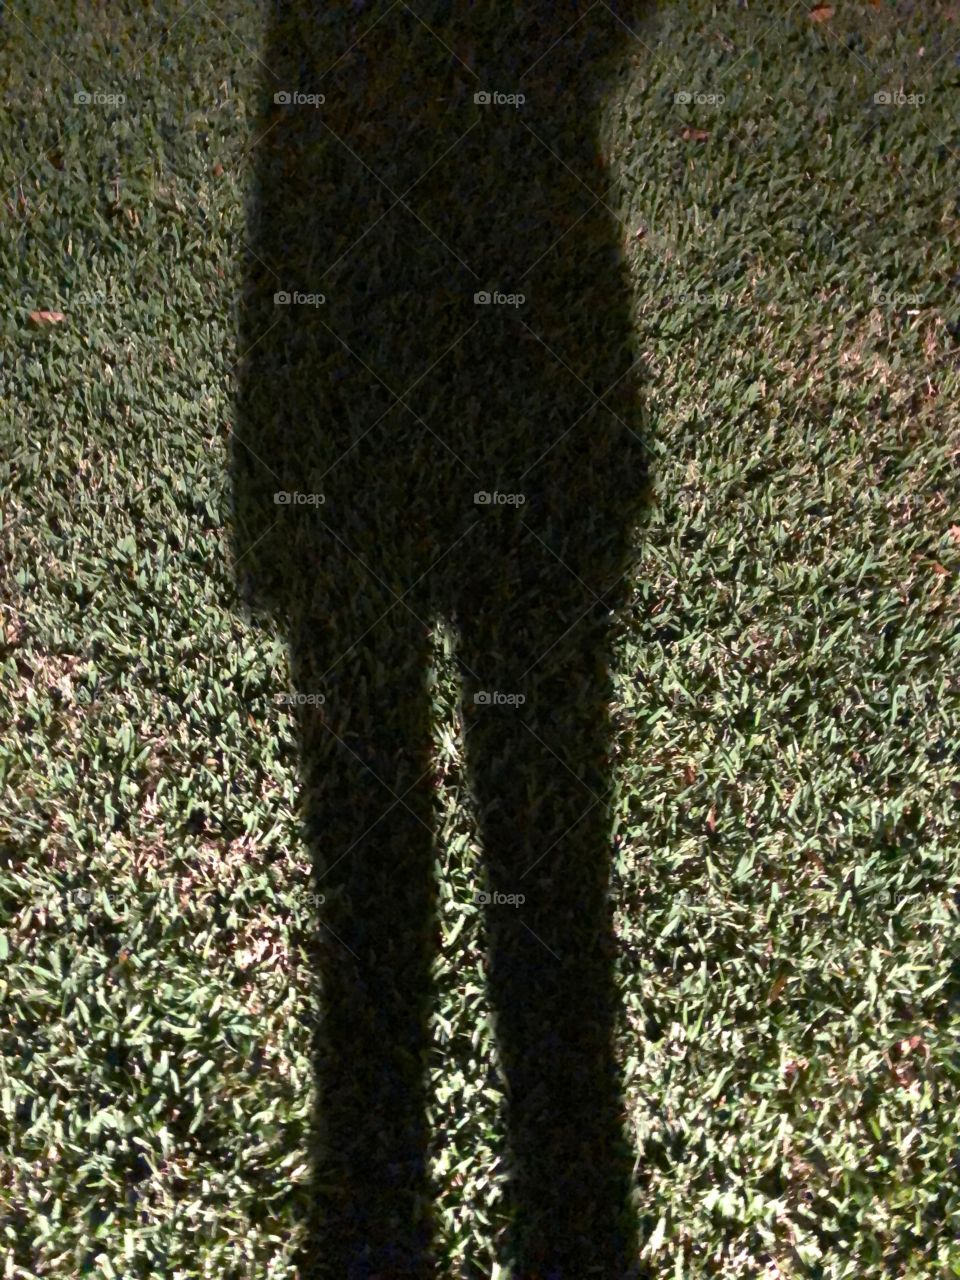 Silhouette of woman Dark shadow on seemingly vertical lit up grass at night